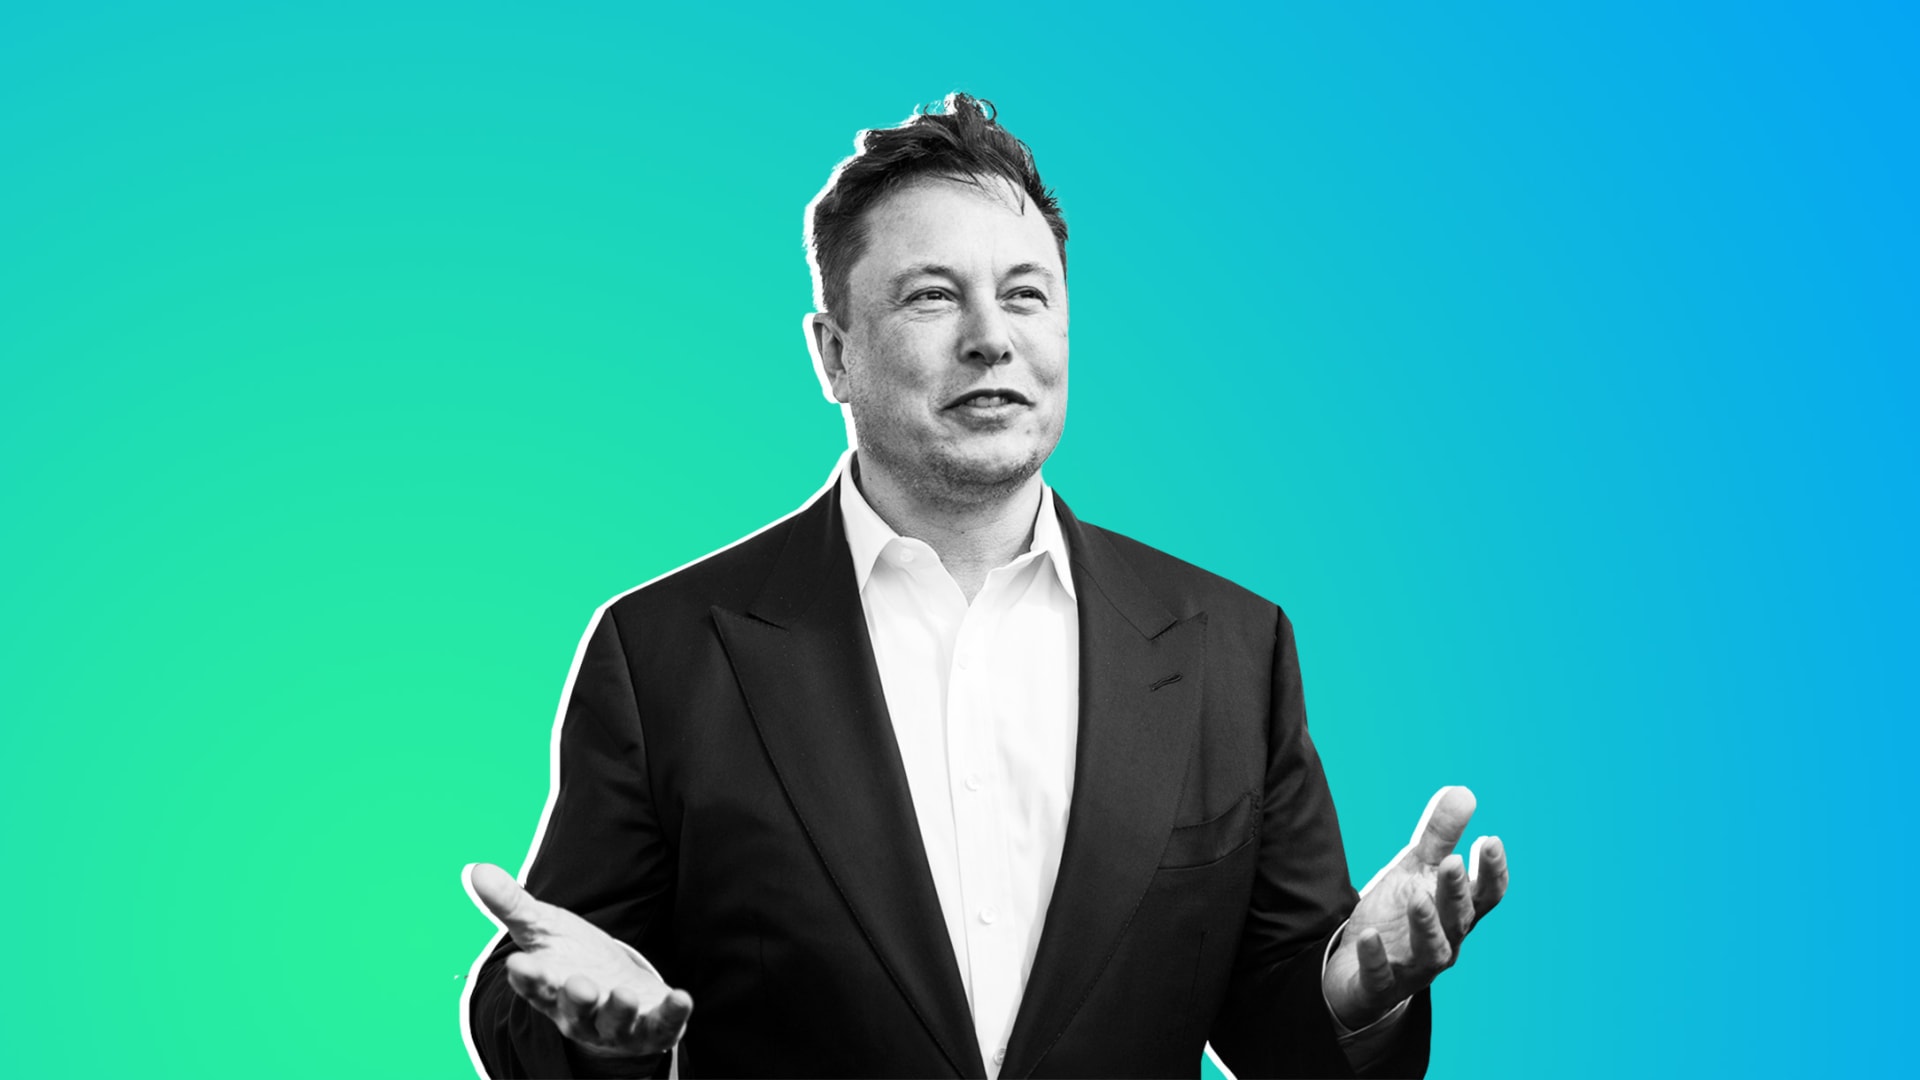 Elon Musk Just Tweeted a Brutal Admission About Tesla's Self-Driving Cars. Every Leader Should Be This Honest